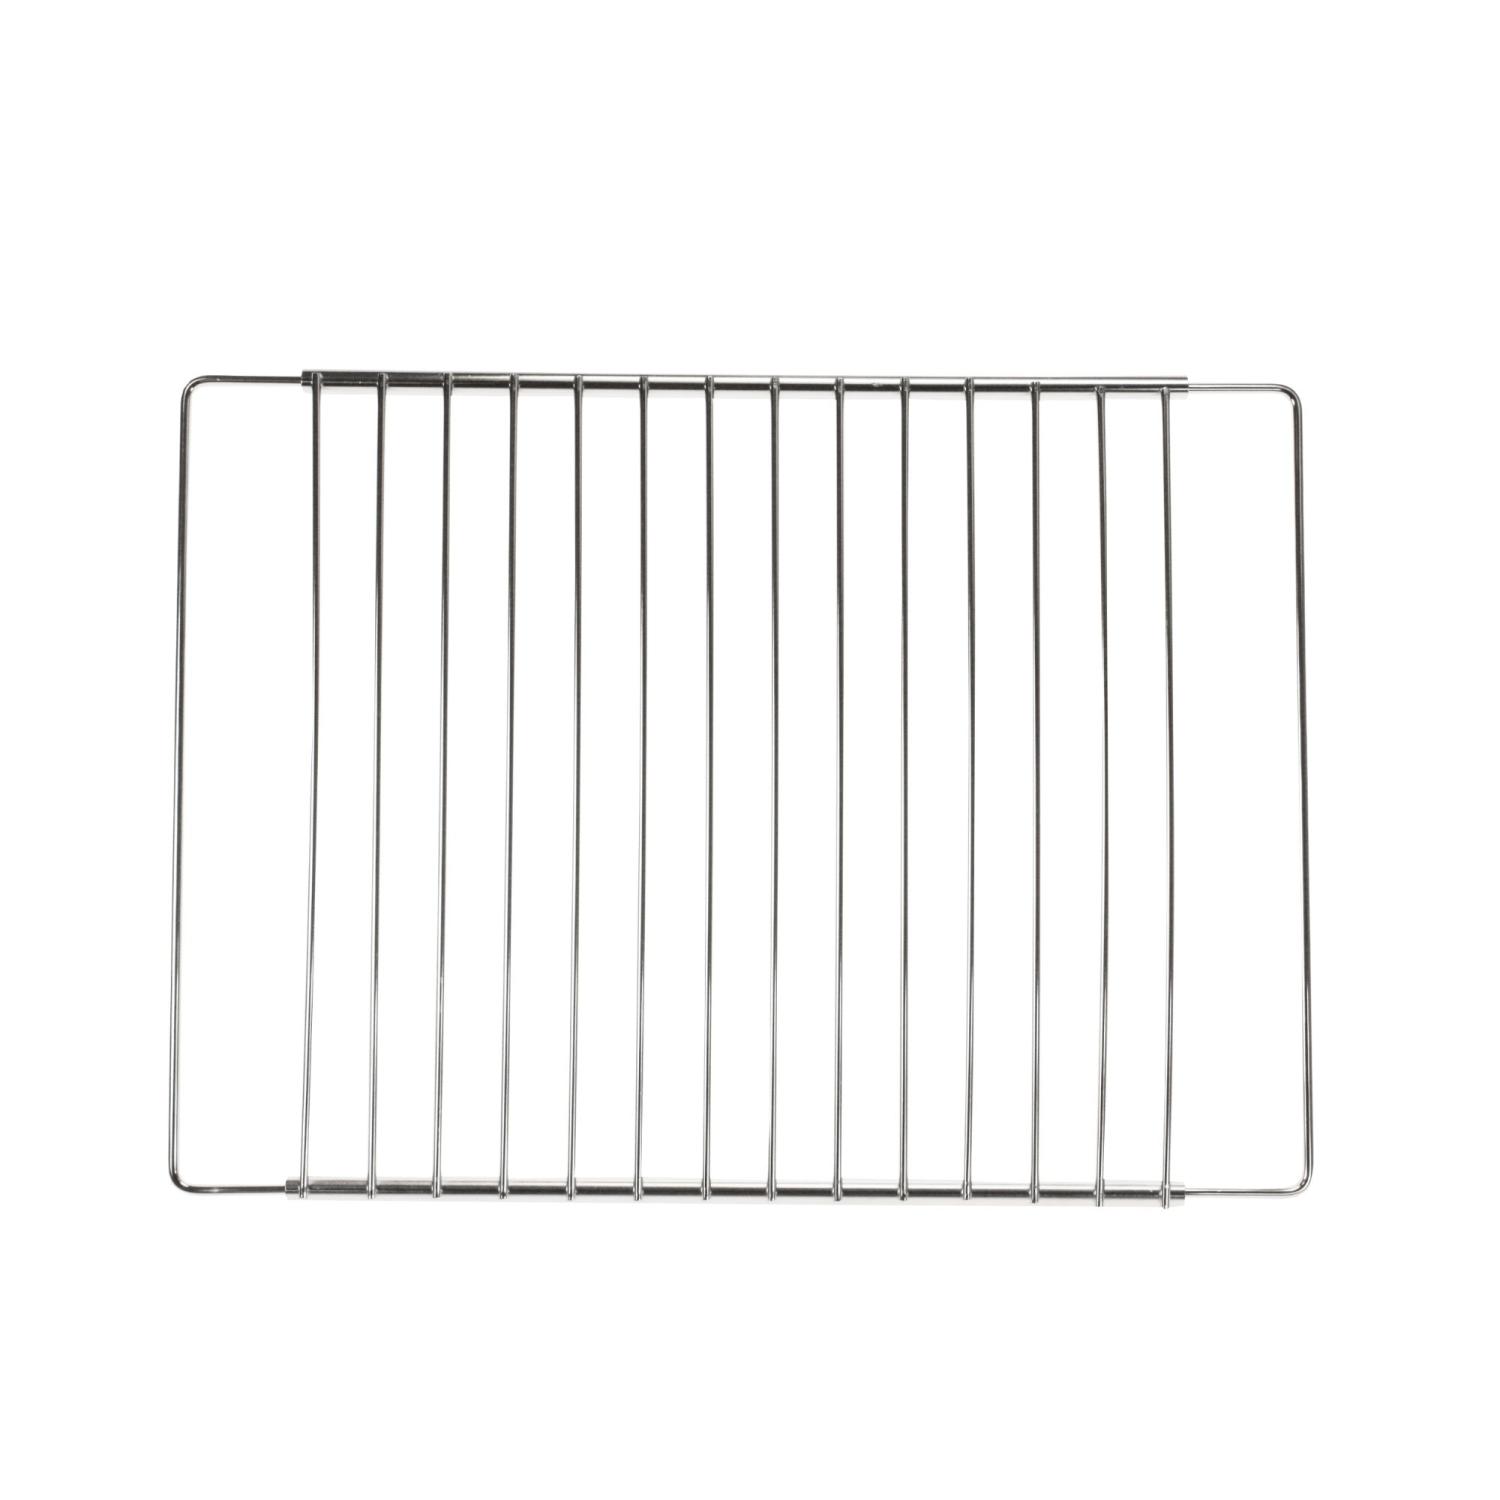 Support universel pour grillades, grill rack, grille à griller, barbecue, barbecue, grille de barbecue, grille de barbecue, fournisseur, dropshipping, vente en gros